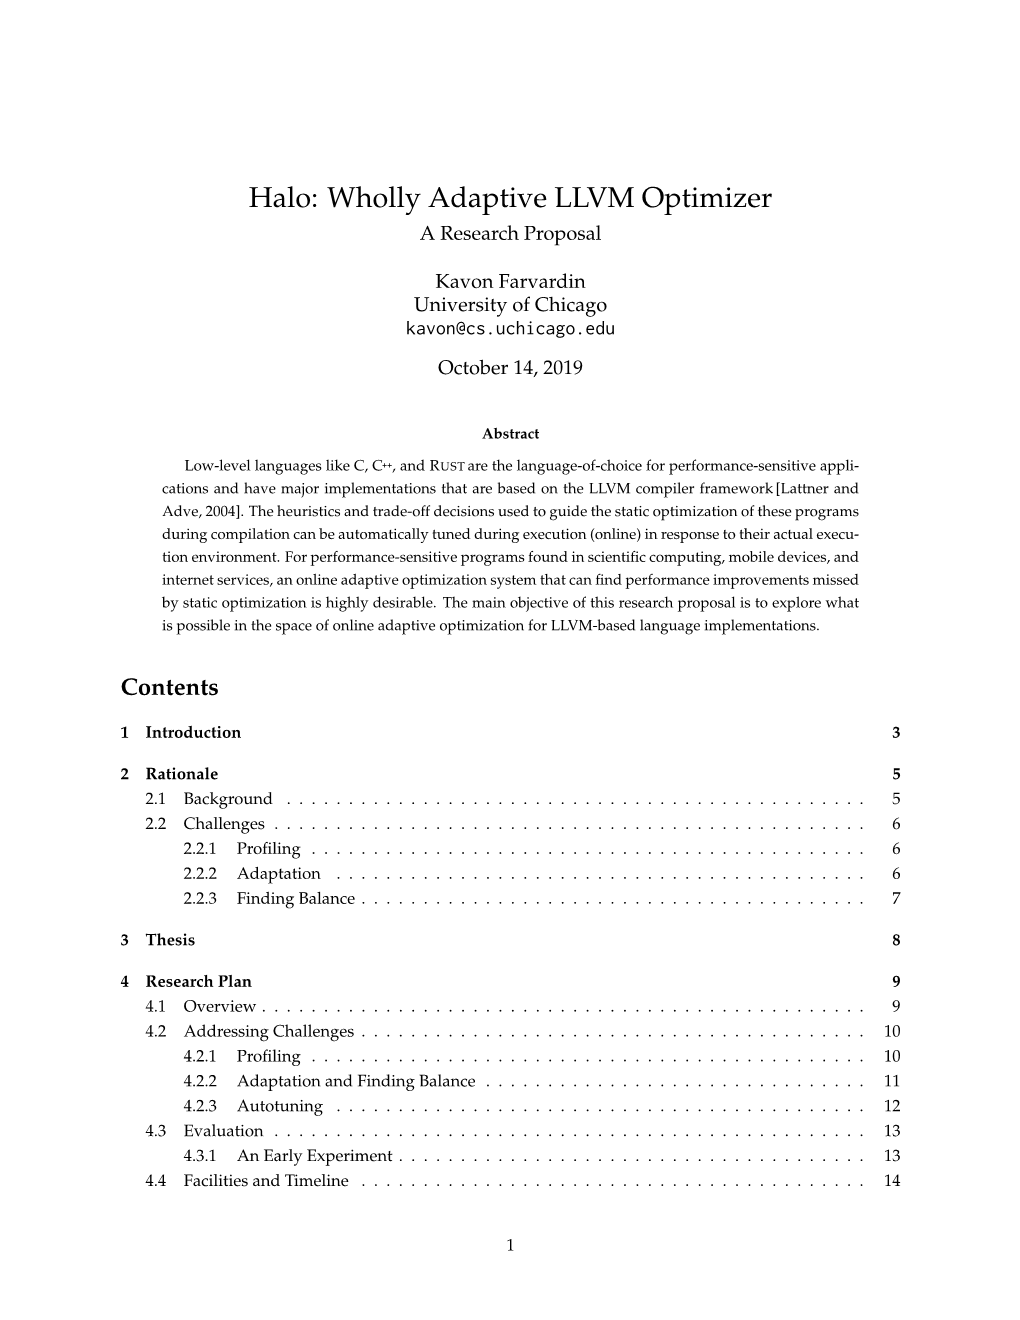 Halo: Wholly Adaptive LLVM Optimizer a Research Proposal